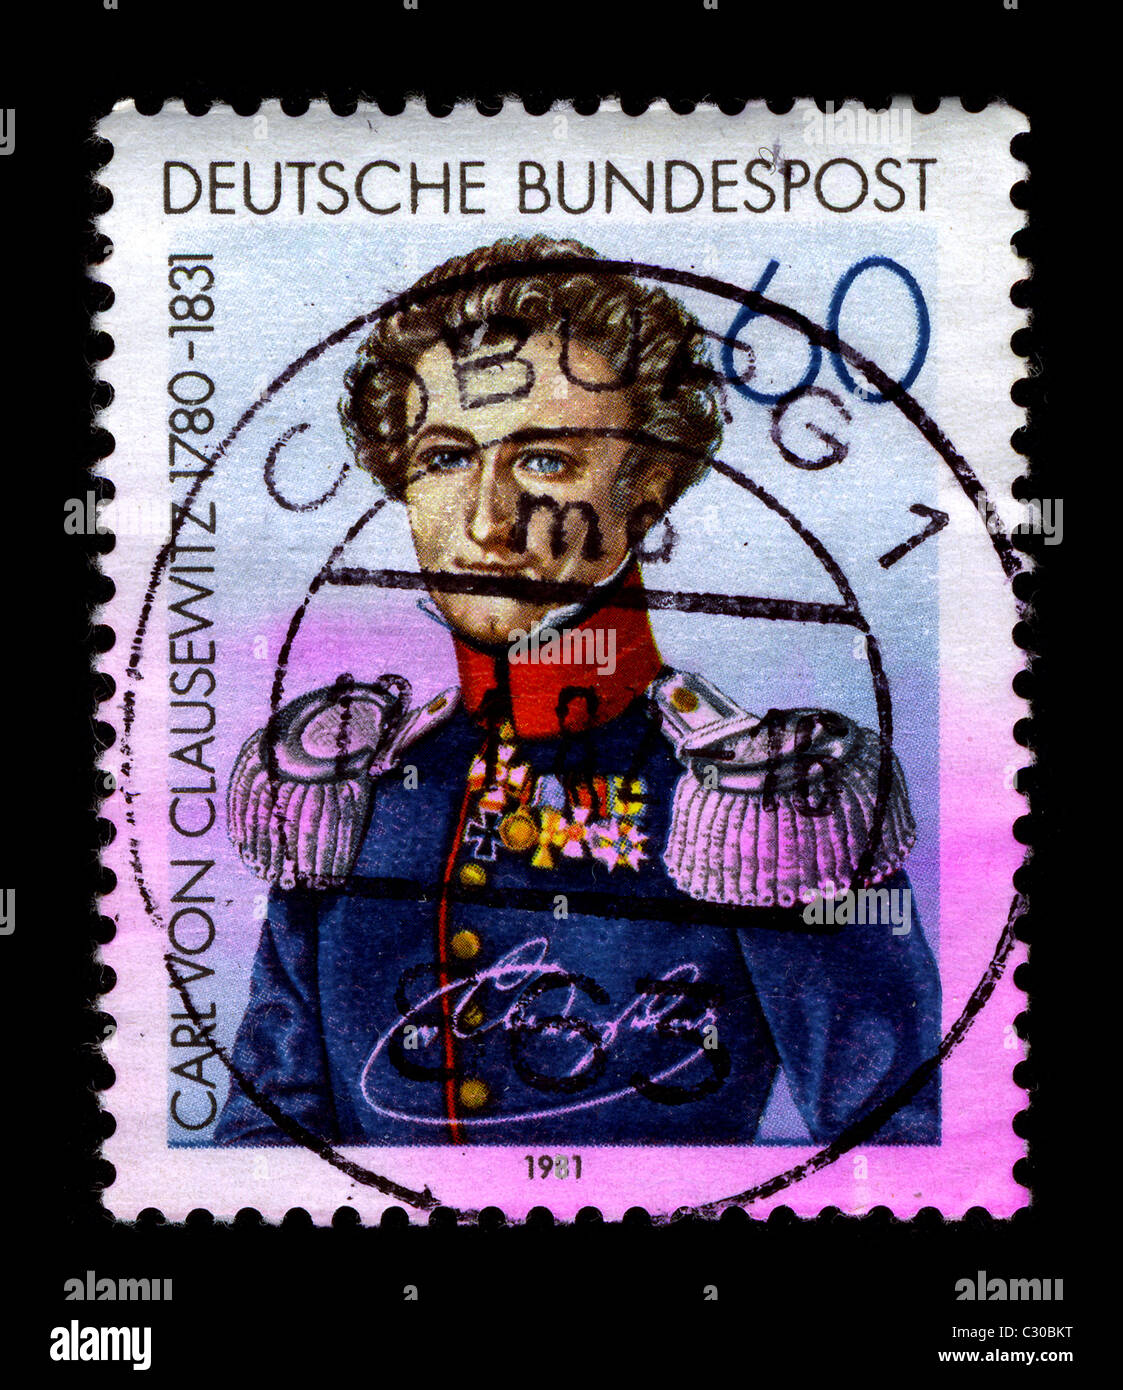 GERMANY-CIRCA 1981:A stamp printed in GERMANY shows image of the Carl Philipp Gottfried von Clausewitz (June 1, 1780 - November 16, 1831) was a Prussian soldier and German military theorist who stressed the moral and political aspects of war, circa 1981. Stock Photo